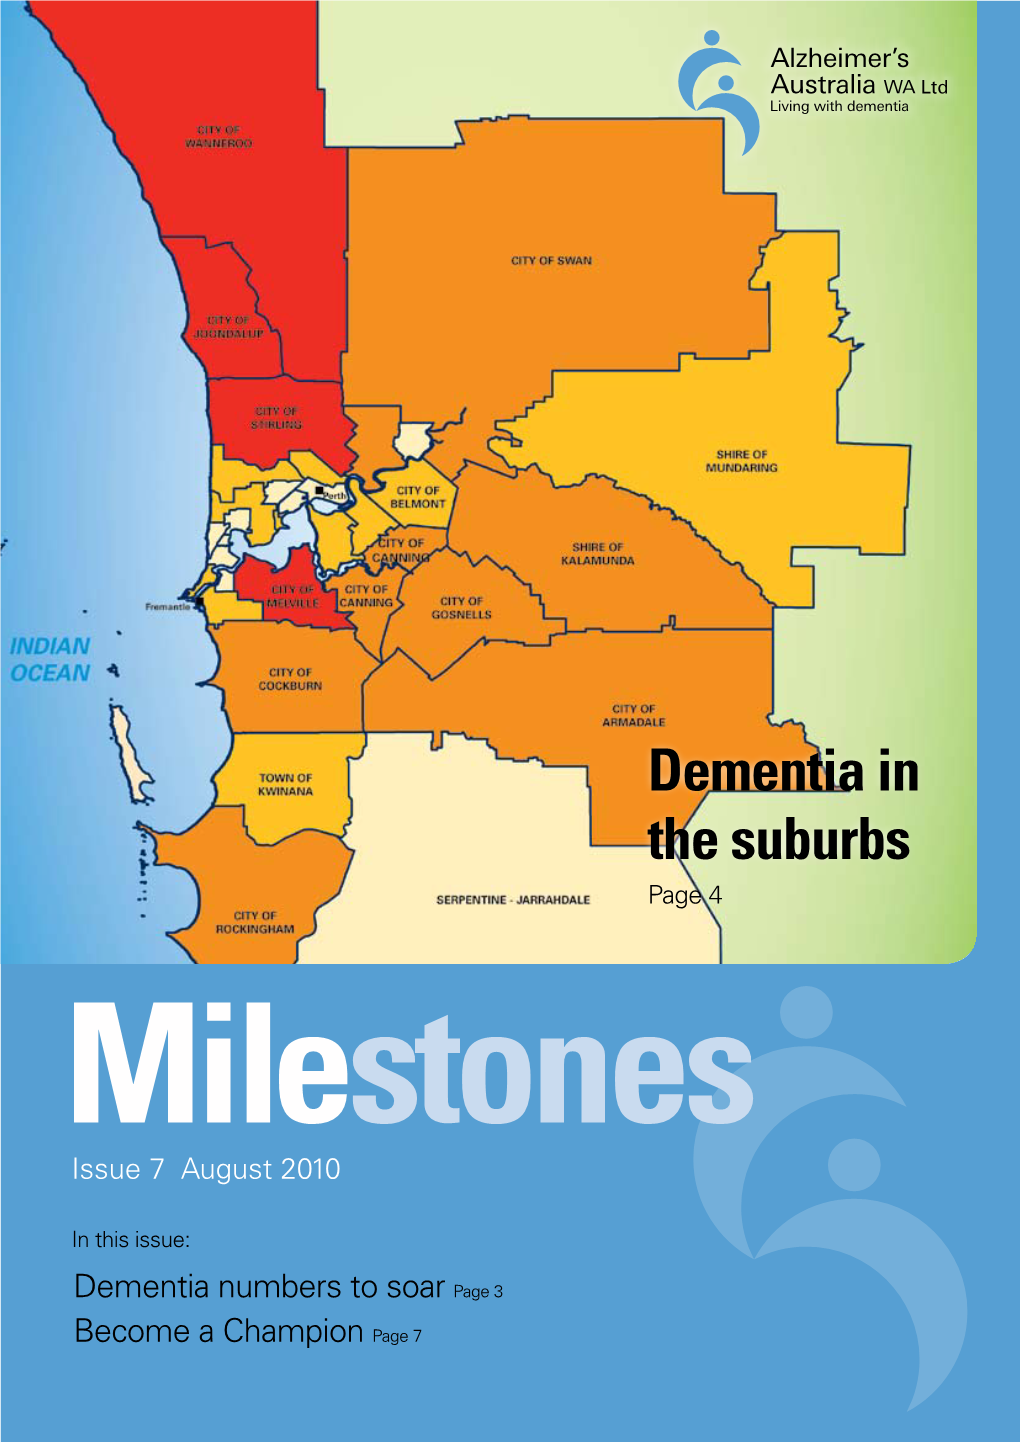 Dementia in the Suburbs Page 4 Milestones Issue 7 August 2010